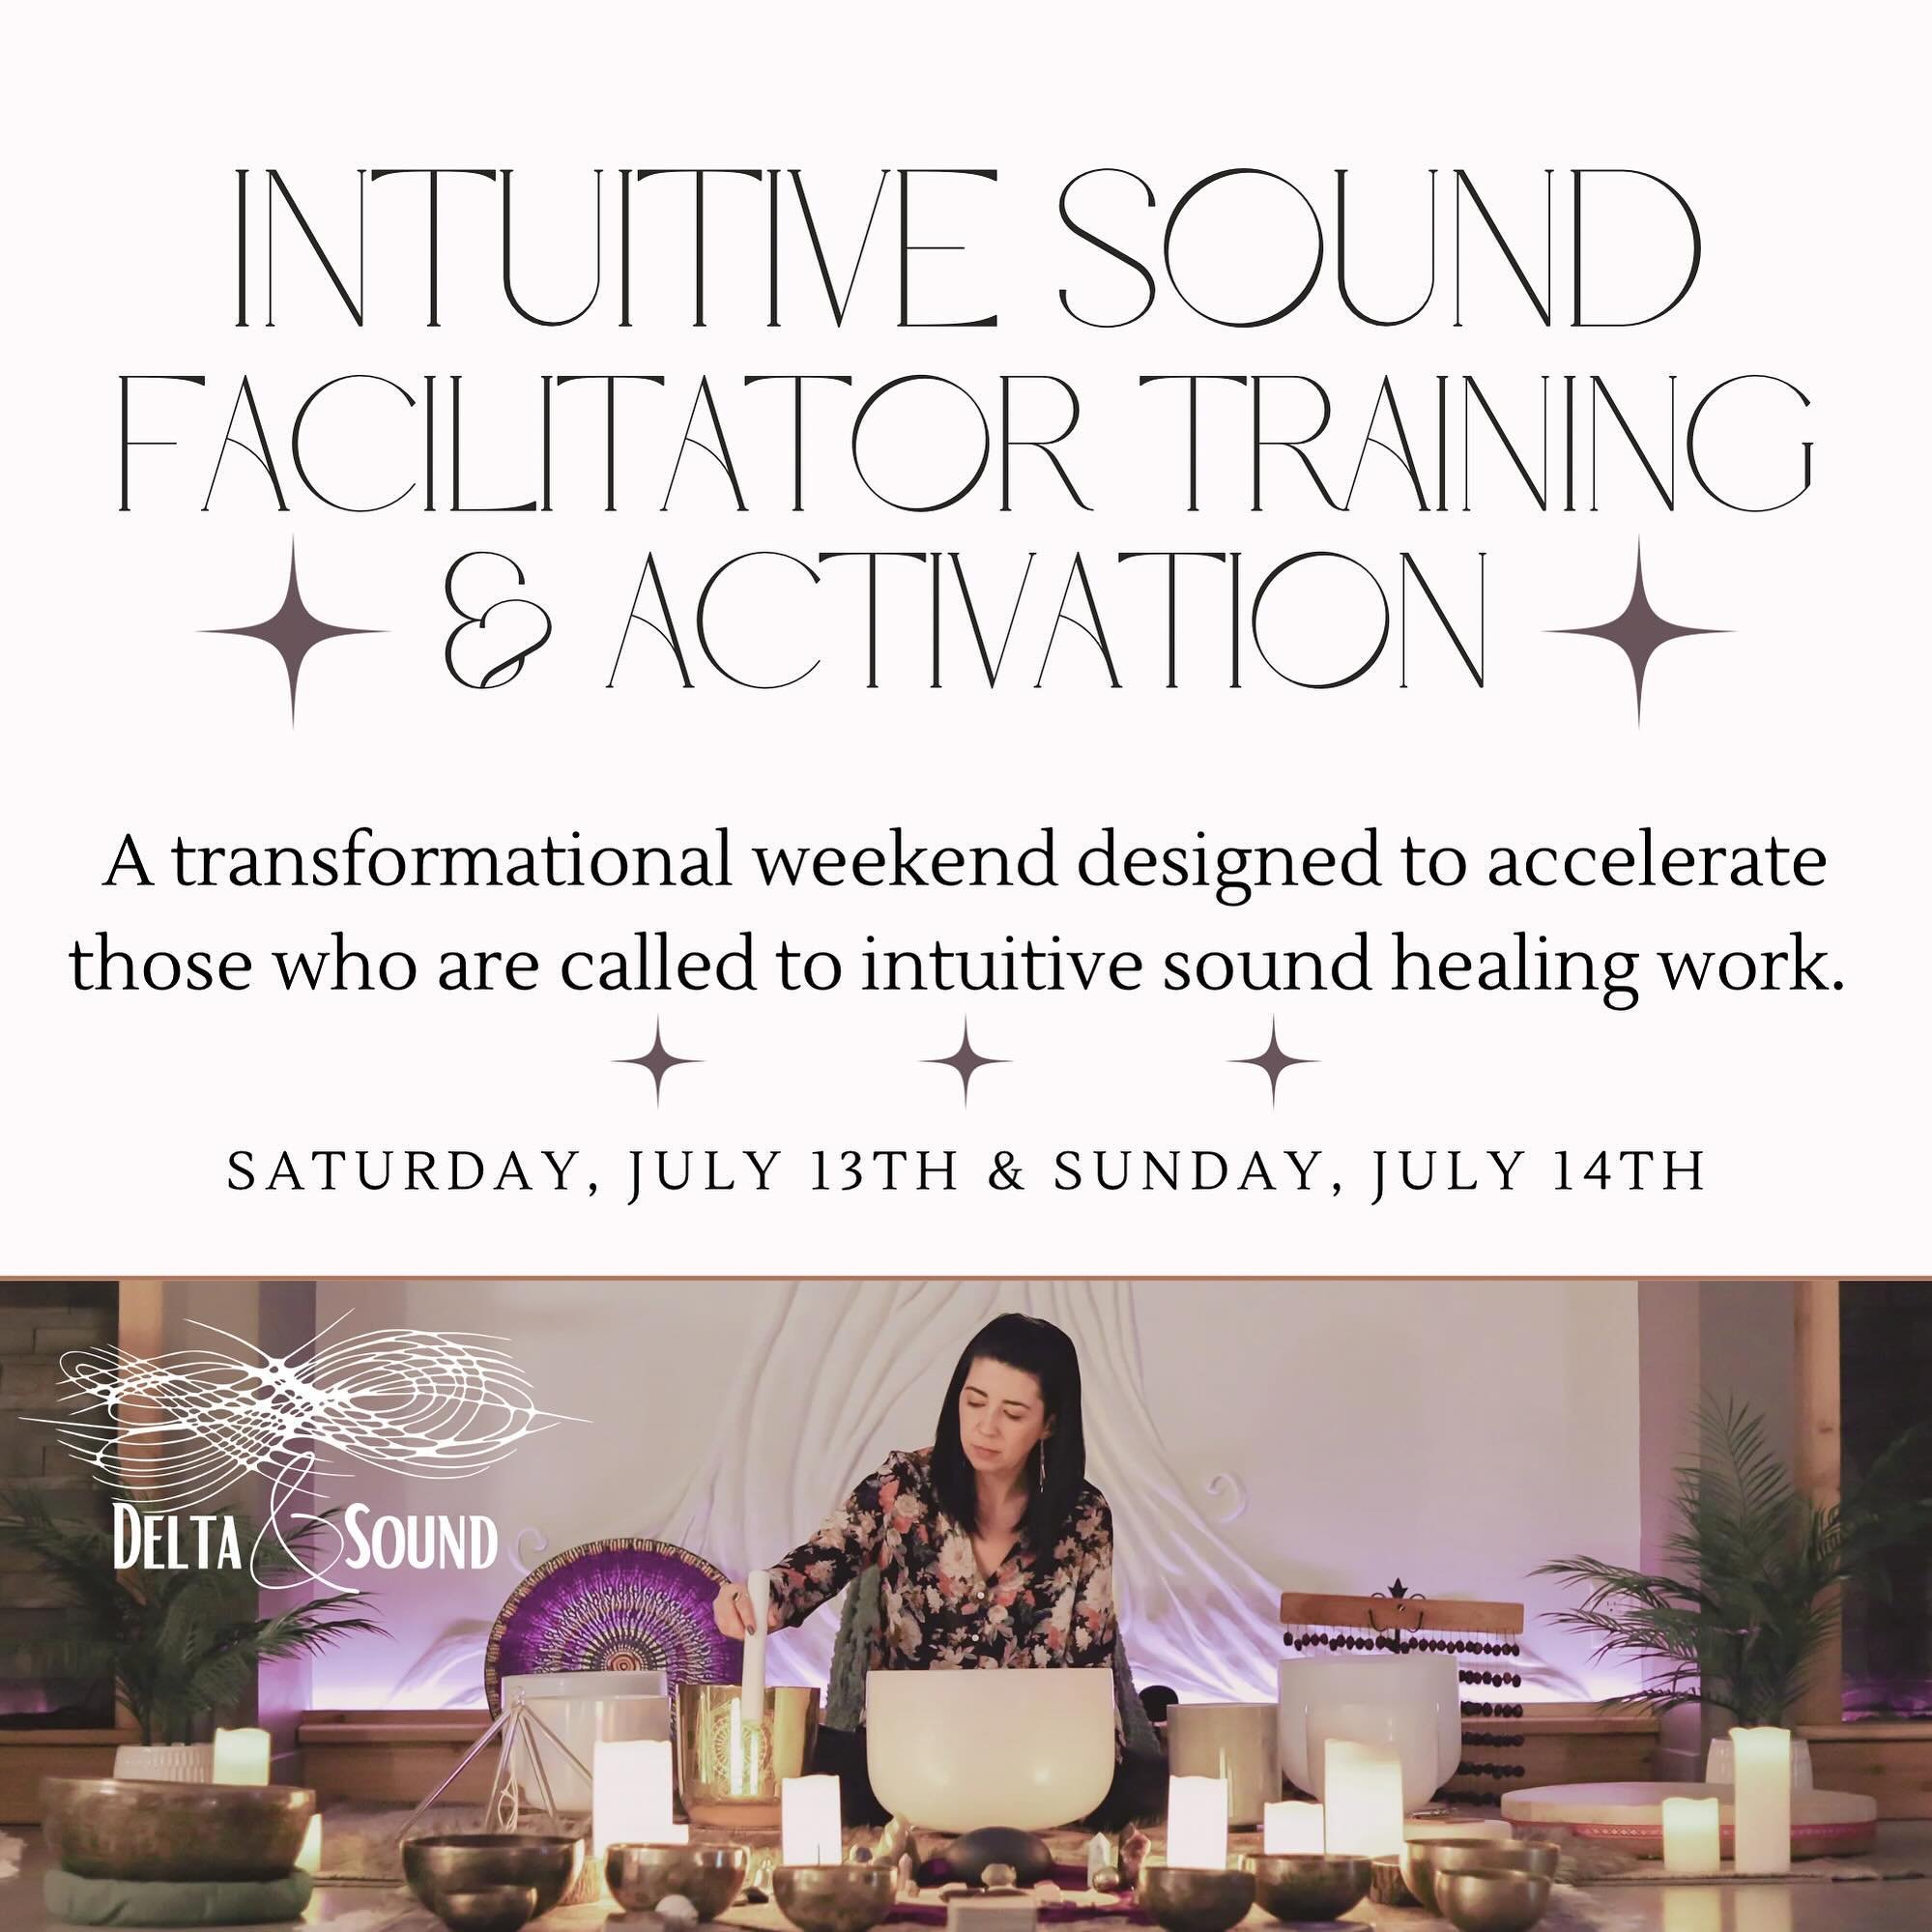 Intuitive Sound Facilitator Training &amp; Activation
Saturday, July 13th &amp; Sunday, July 14th | 10am - 5pm 
$500
Early bird pricing of $450 until June 13th

Awaken and embody your most authentic expression as a practitioner through this transform